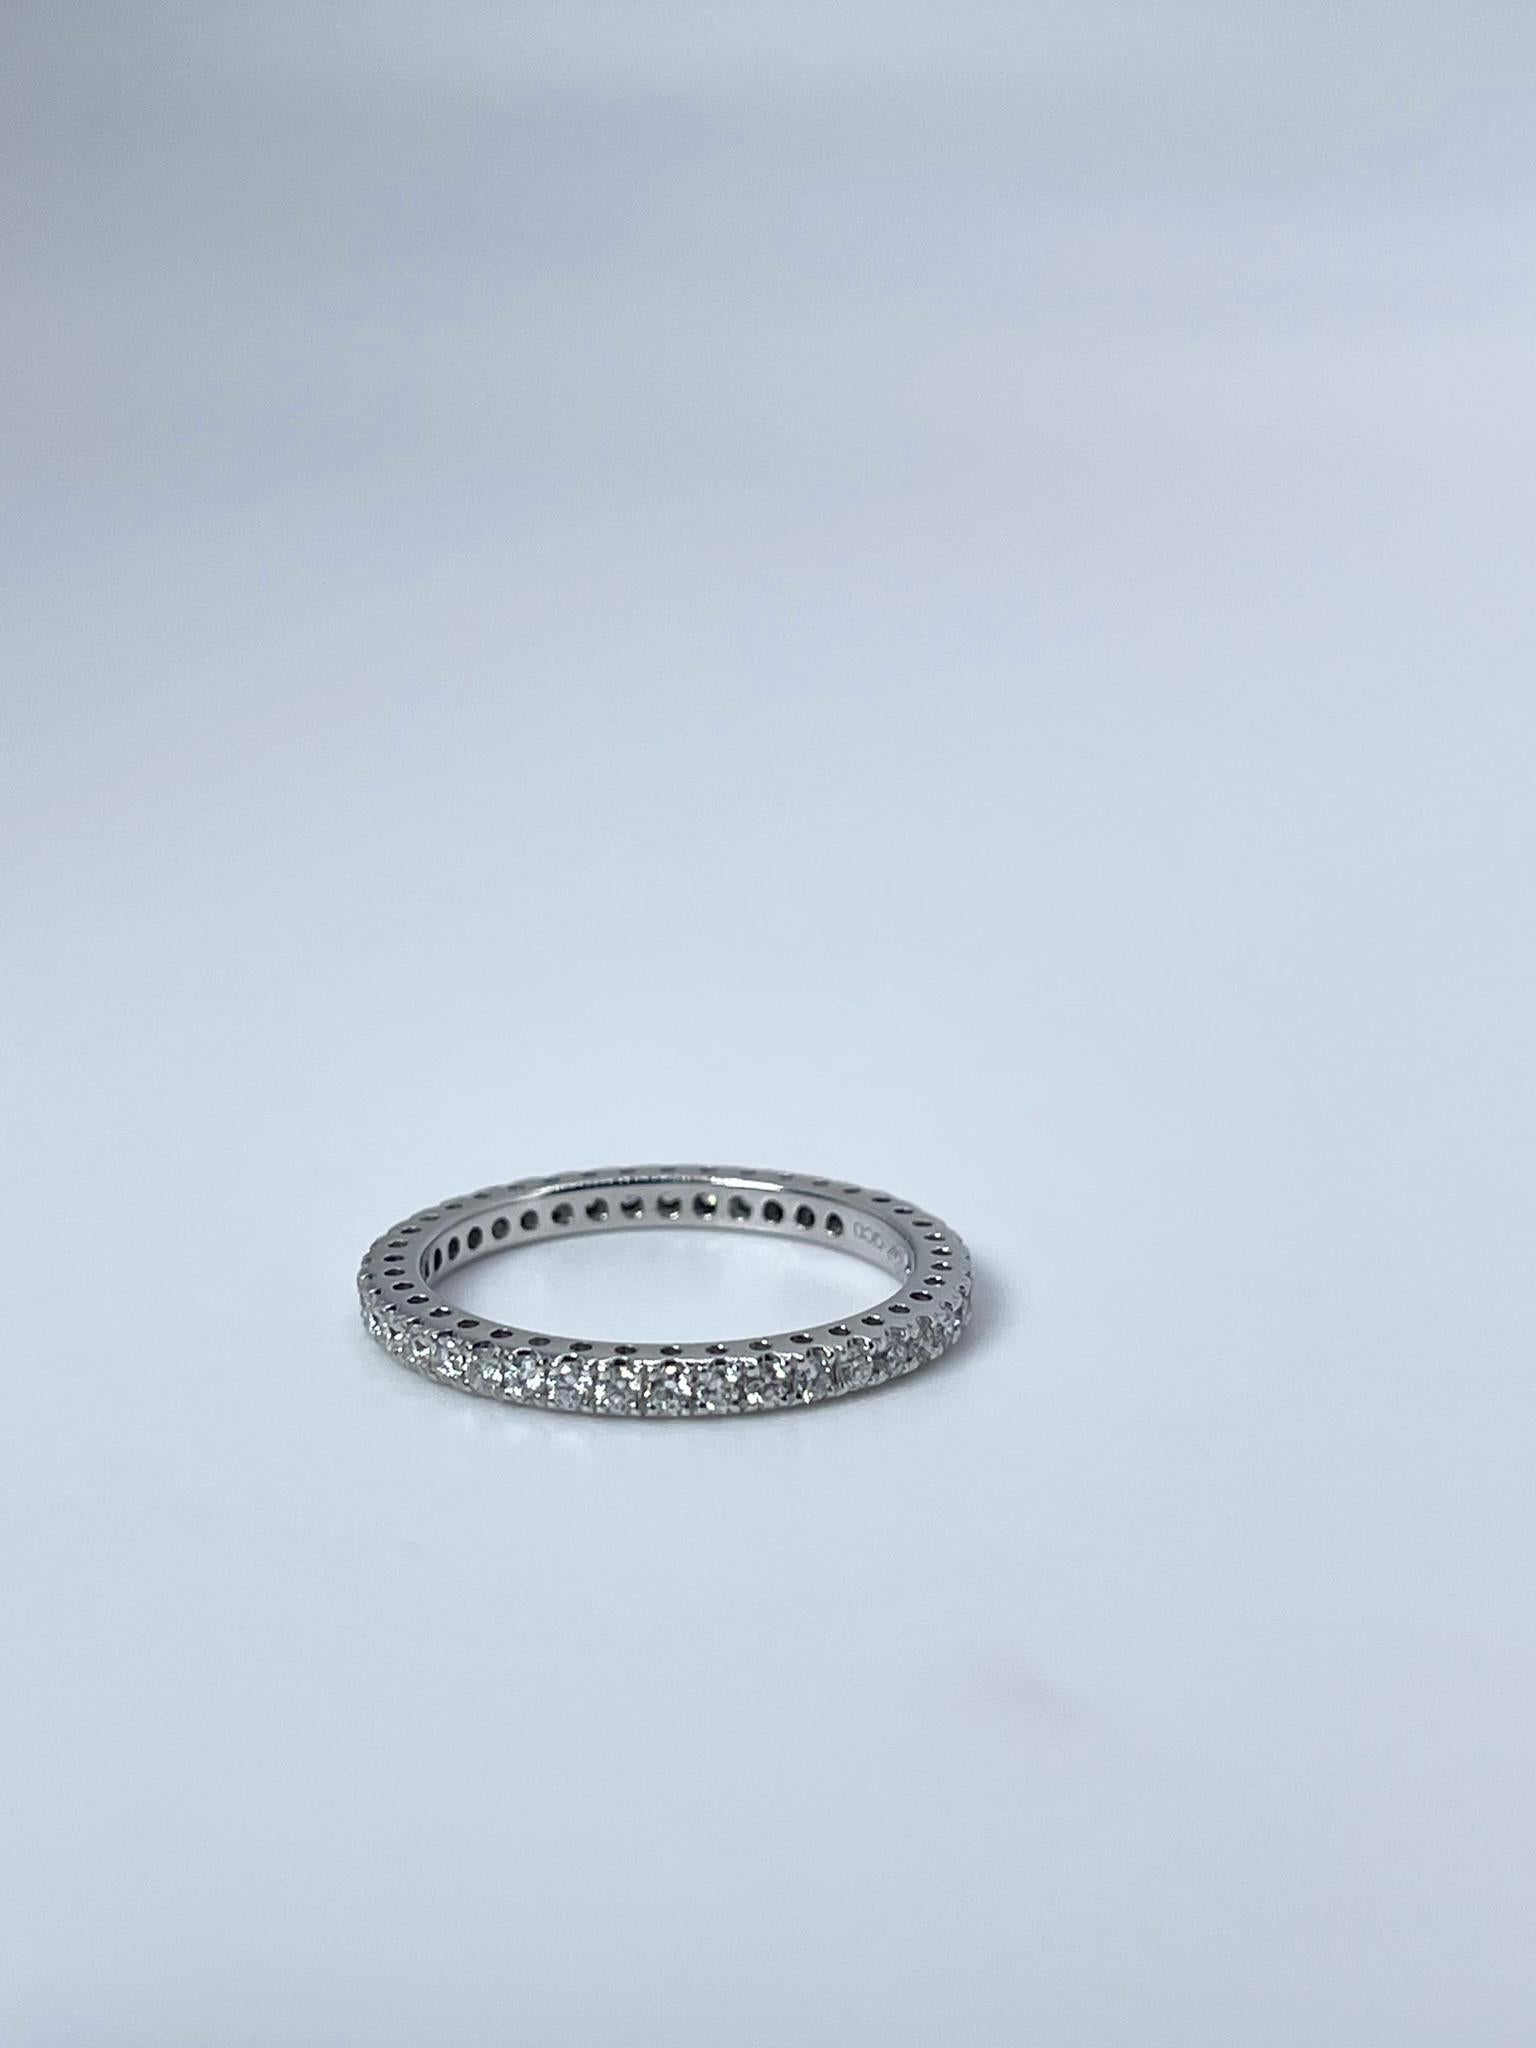 Diamond ring made eternity style, cannot be re-sized.
ITEM#: KFP110-00019
GRAM WEIGHT: 2.01gr
METAL: 14KT

NATURAL DIAMOND(S)
Cut: Round Brilliant
Color: G
Clarity: SI 
Carat: 0.59ct
Size: 7.5 ( cant be re-sized)


WHAT YOU GET AT STAMPAR